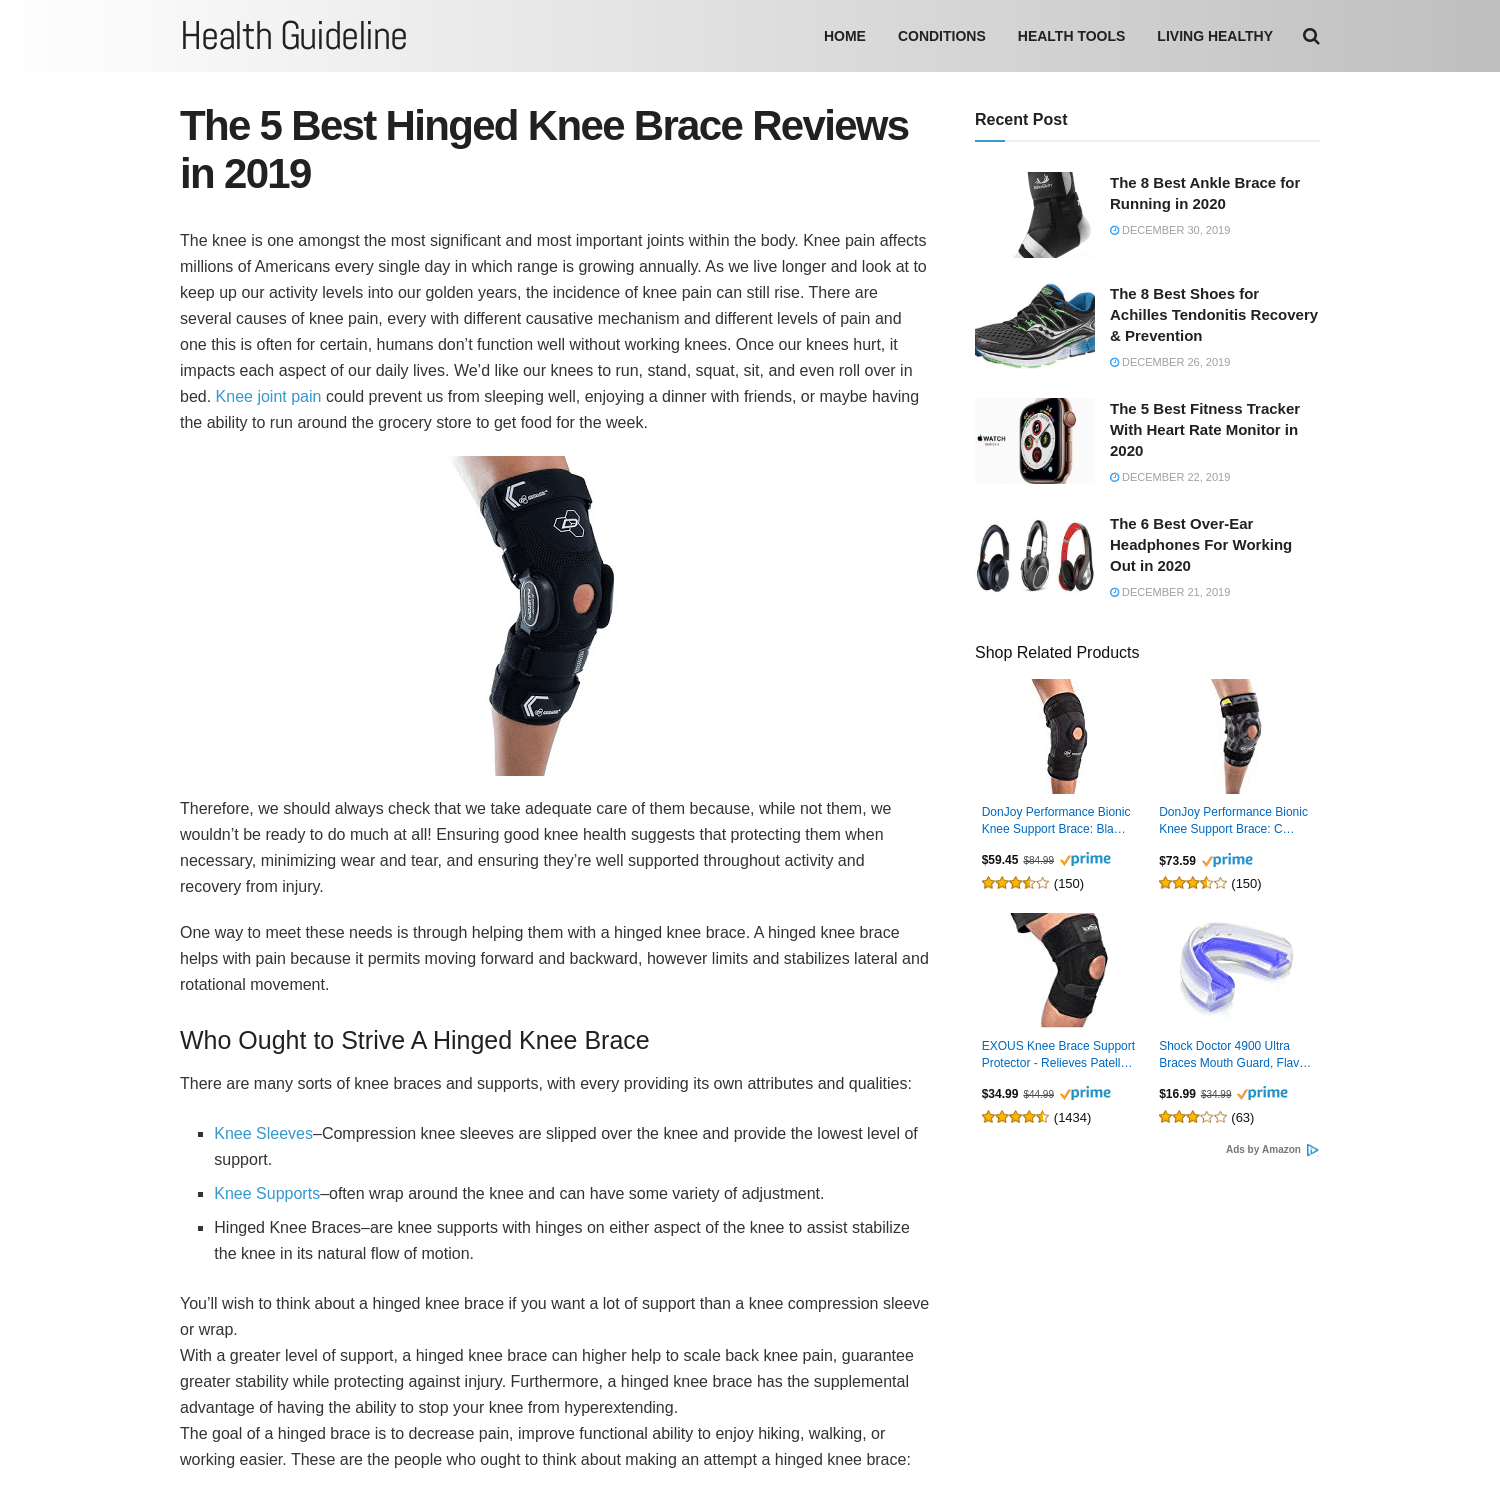 The 5 Best Hinged Knee Brace Reviews in 2019 - Your Health Guideline